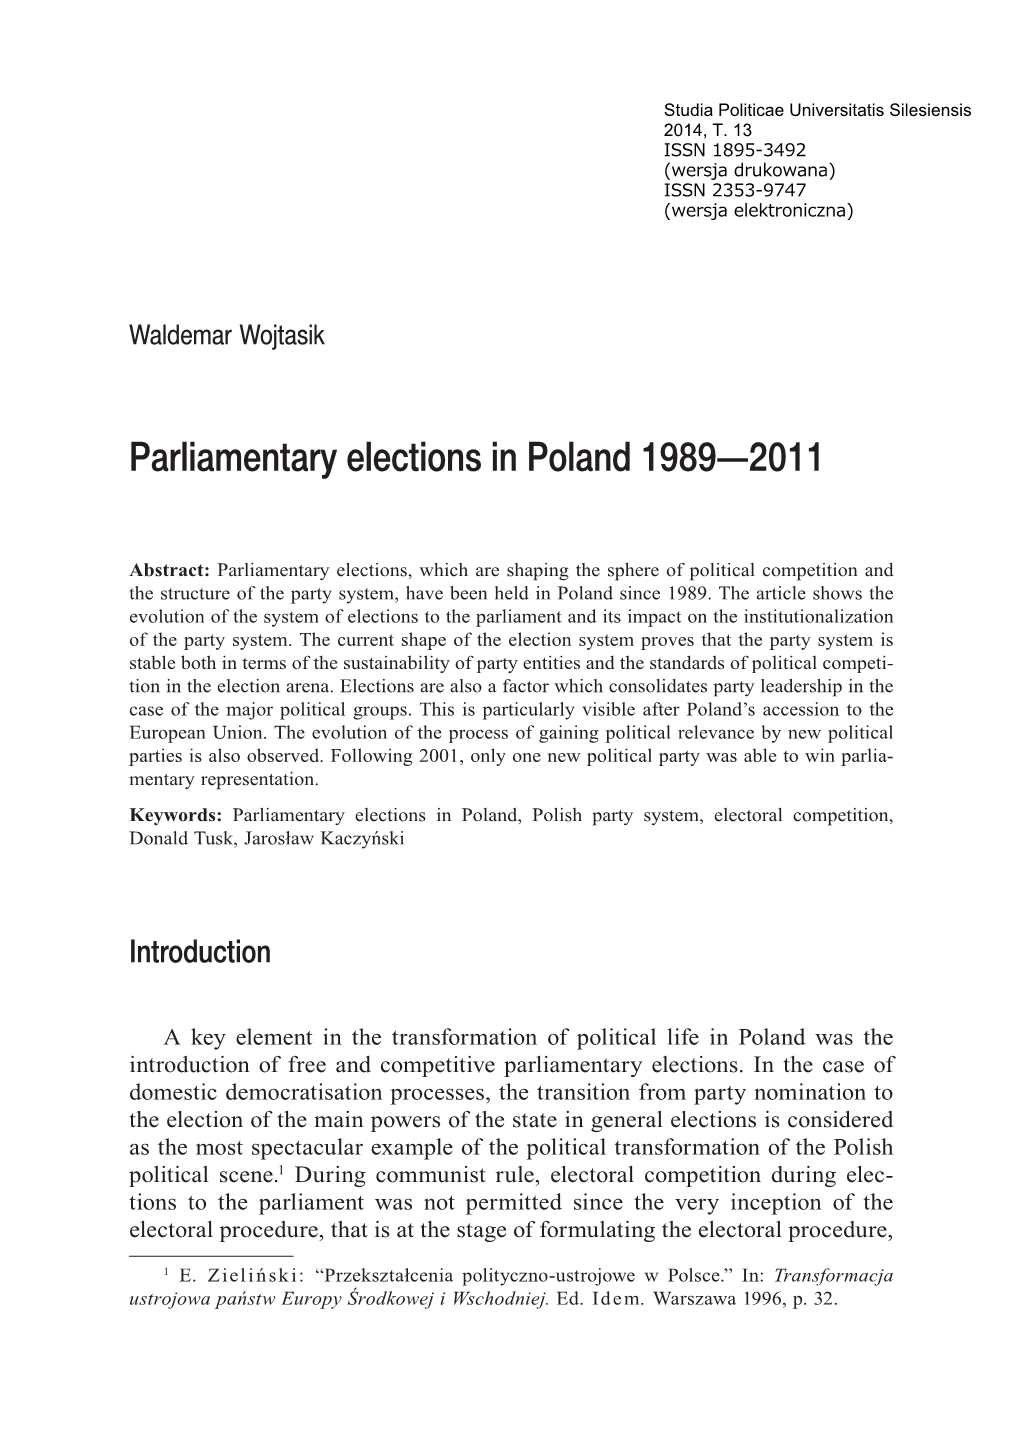 Parliamentary Elections in Poland 1989—2011